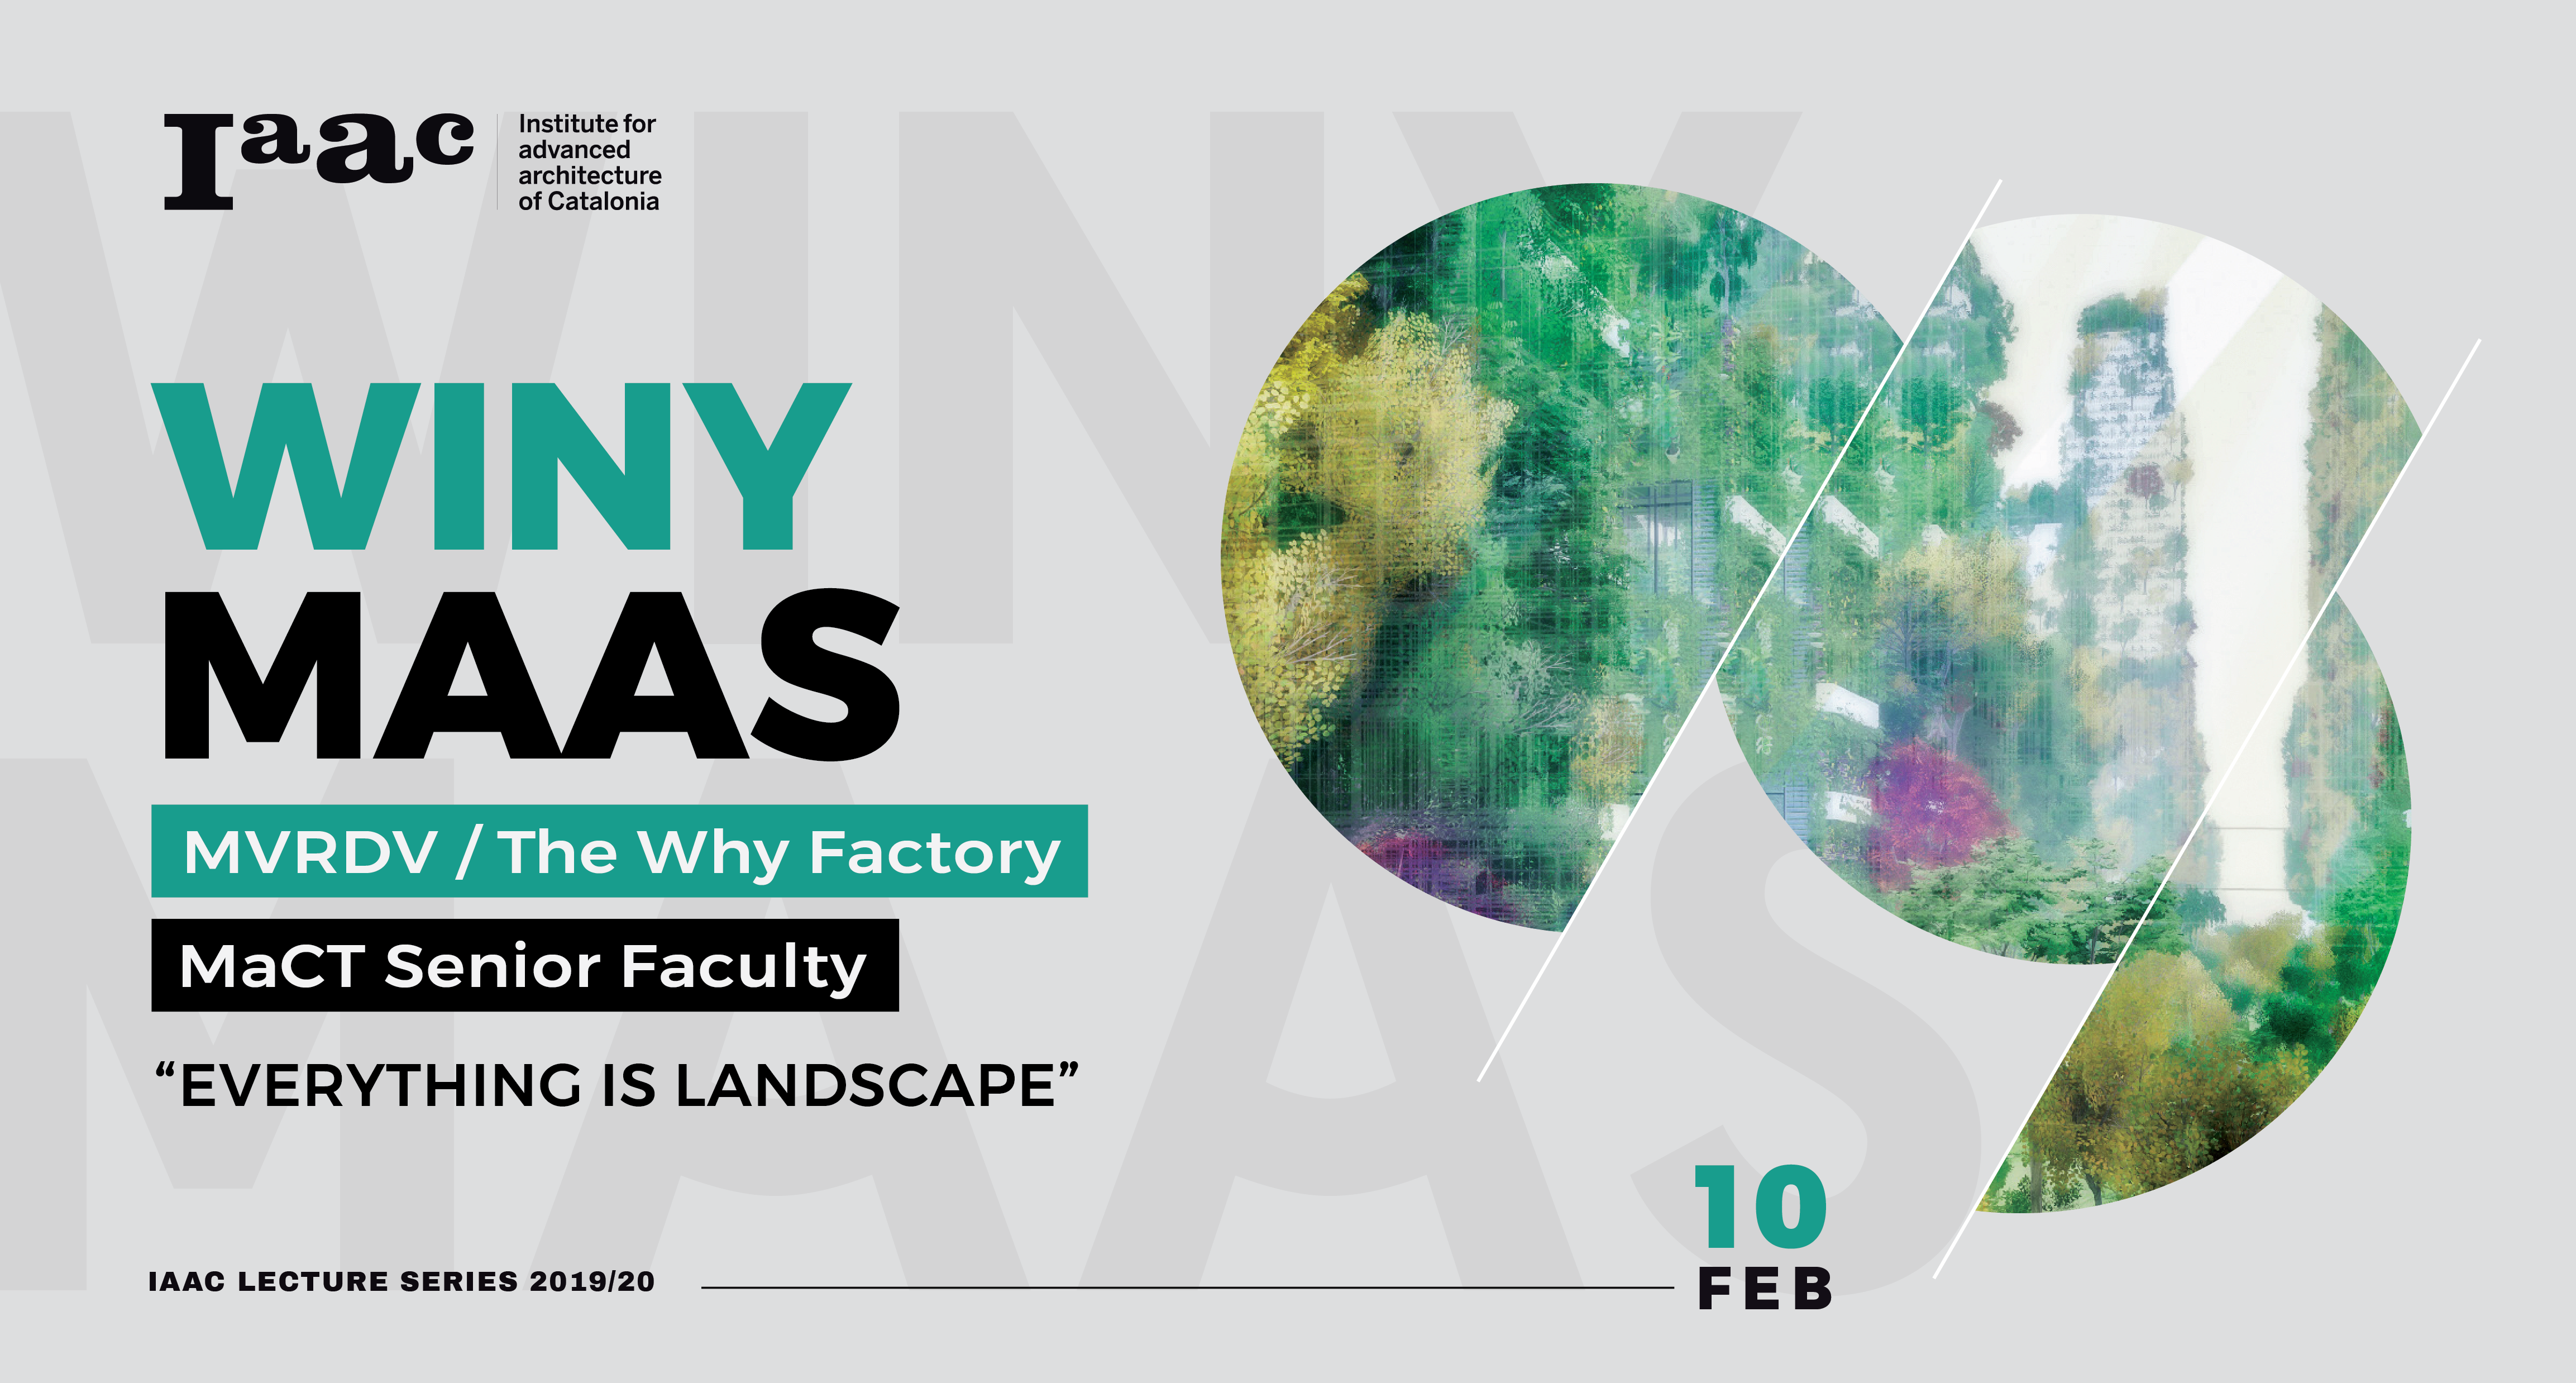 IAAC Lecture Series